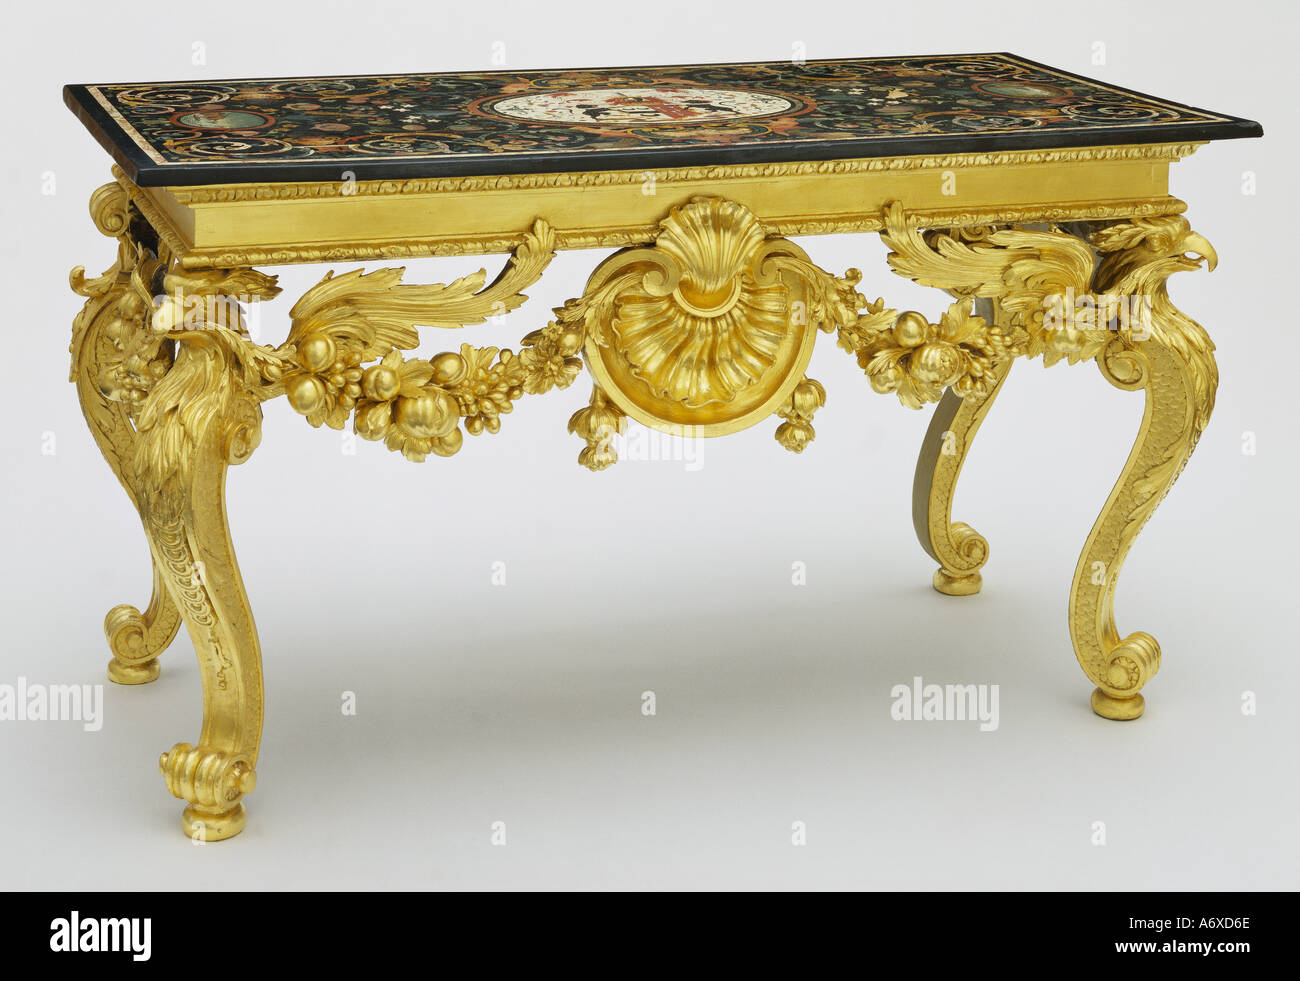 Side Table. Ditchley Park, Oxfordshire, England, mid 18th century. Stock Photo